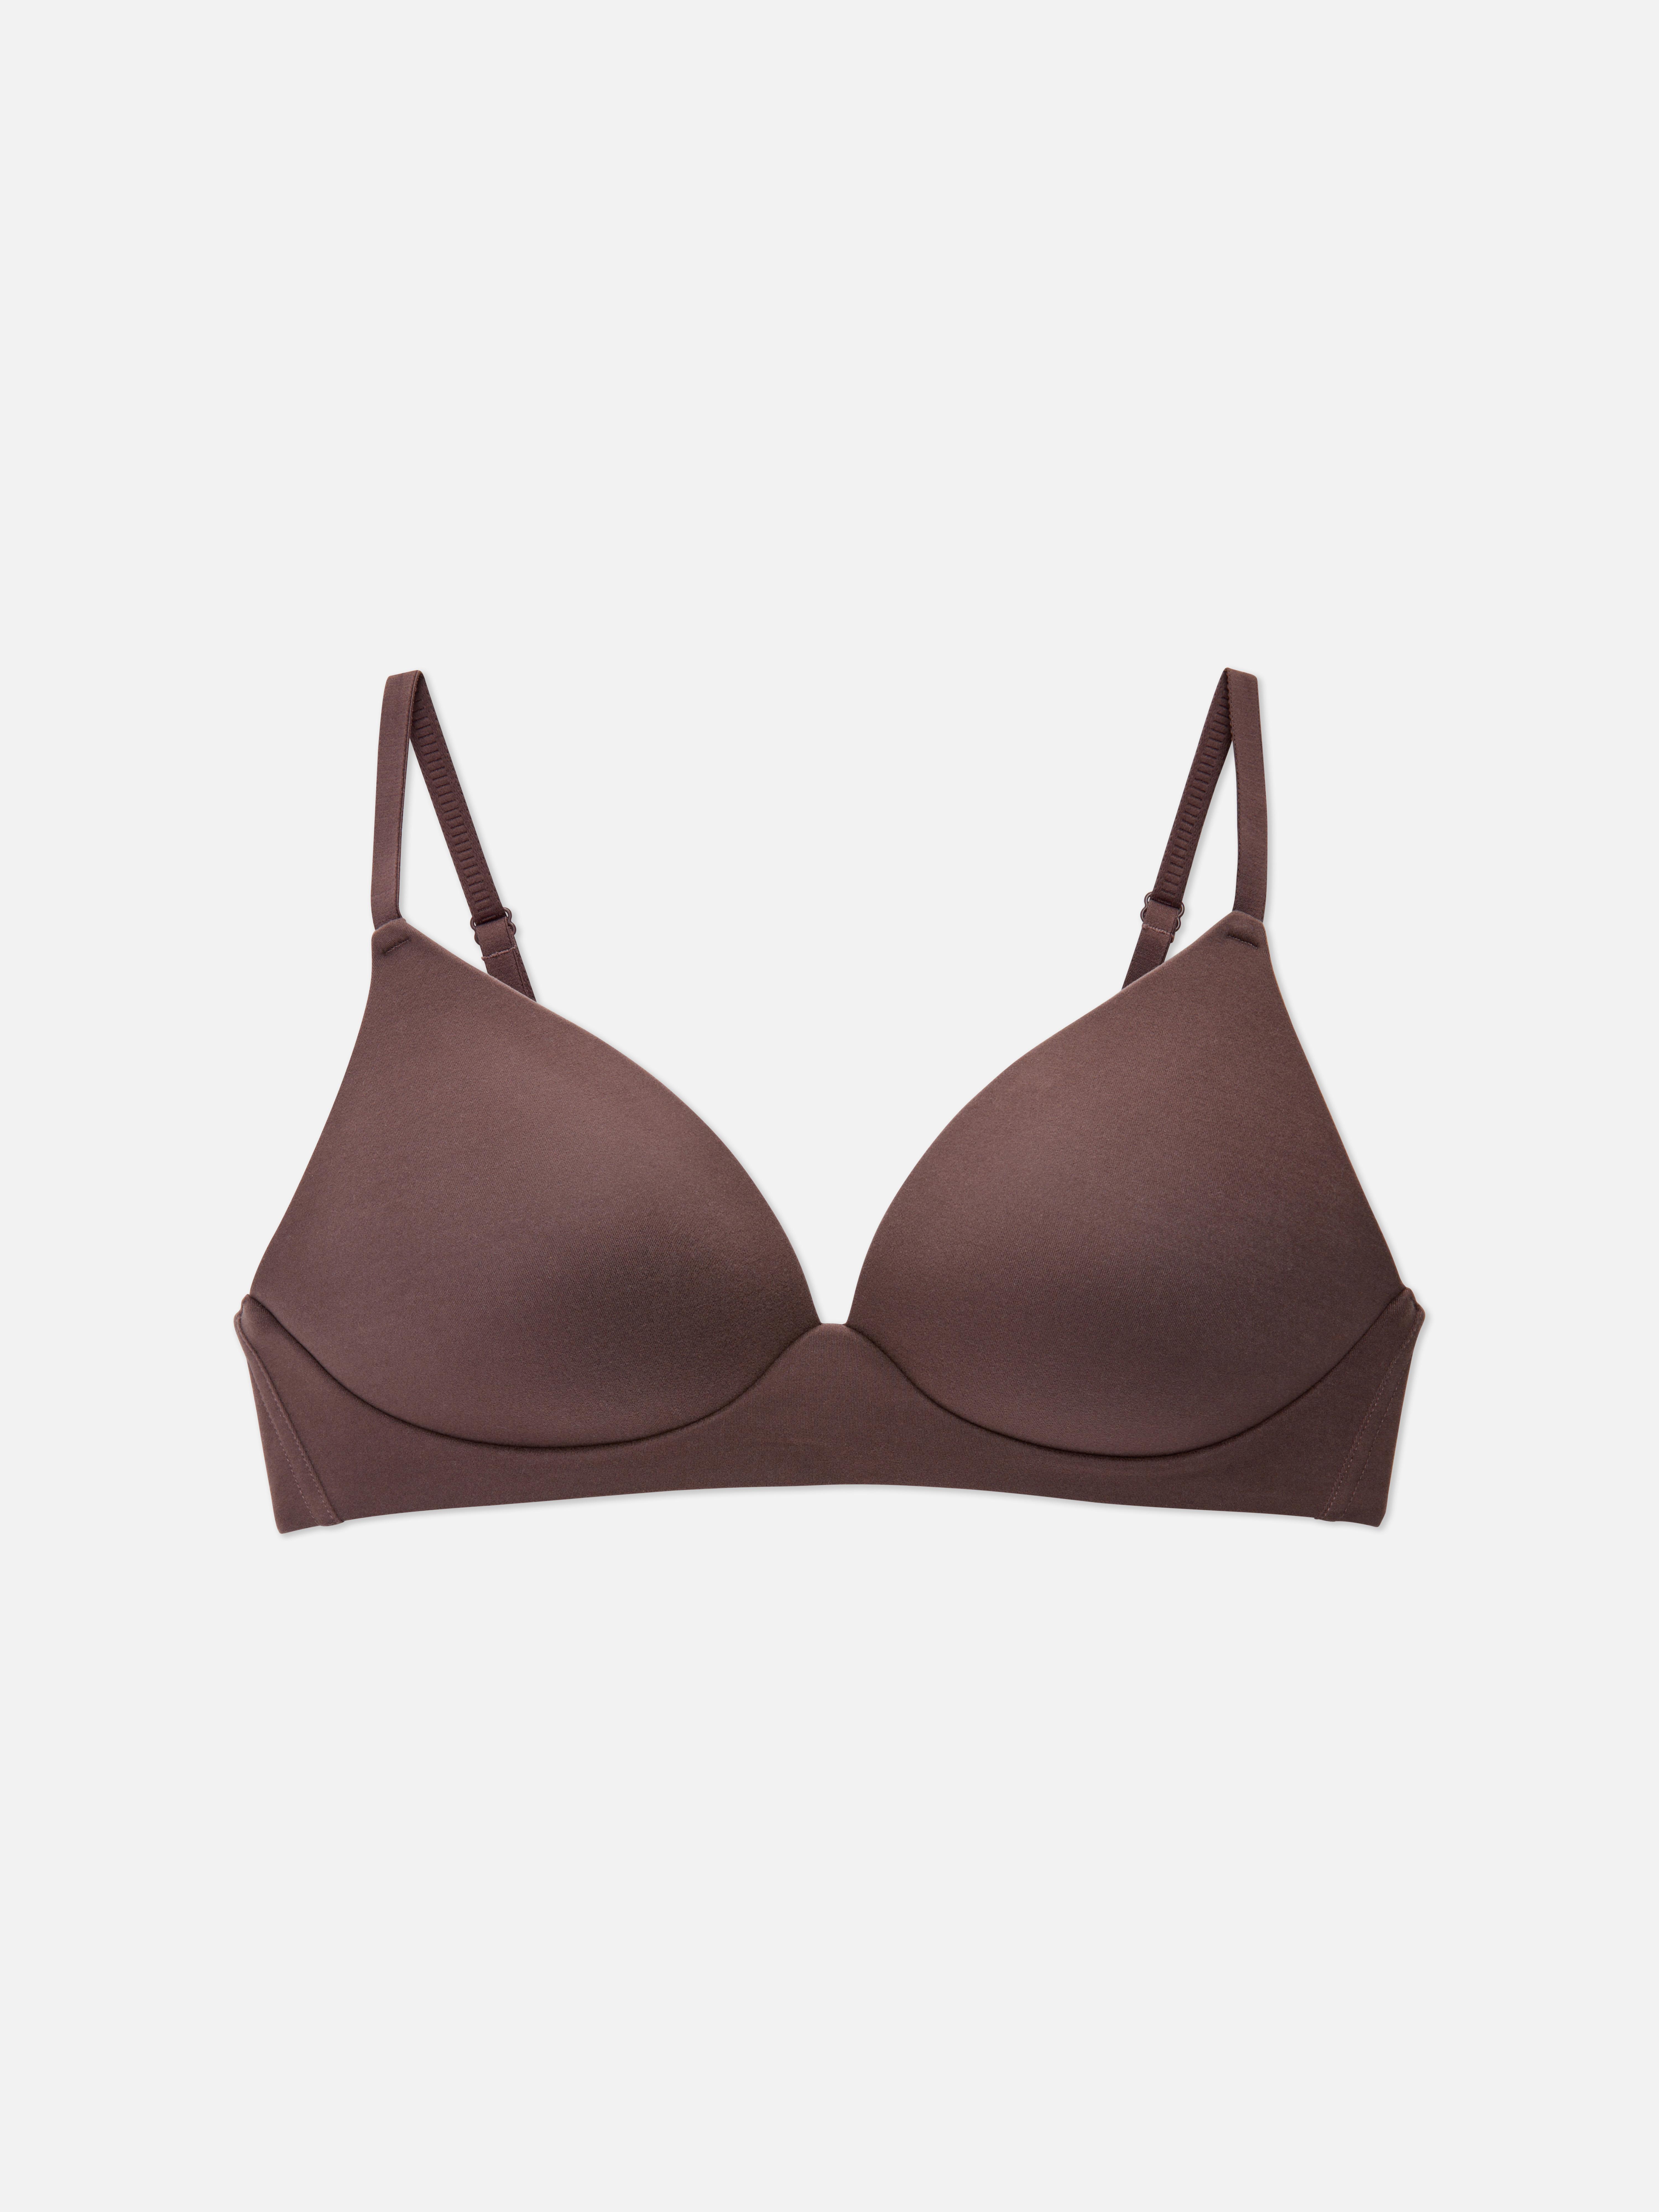 Wireless Push Up Cotton Primark Seamless Bra Set For Women Comfortable And  Sexy Lingerie Underwear WXTZ42001200h From Lqbyc, $25.79